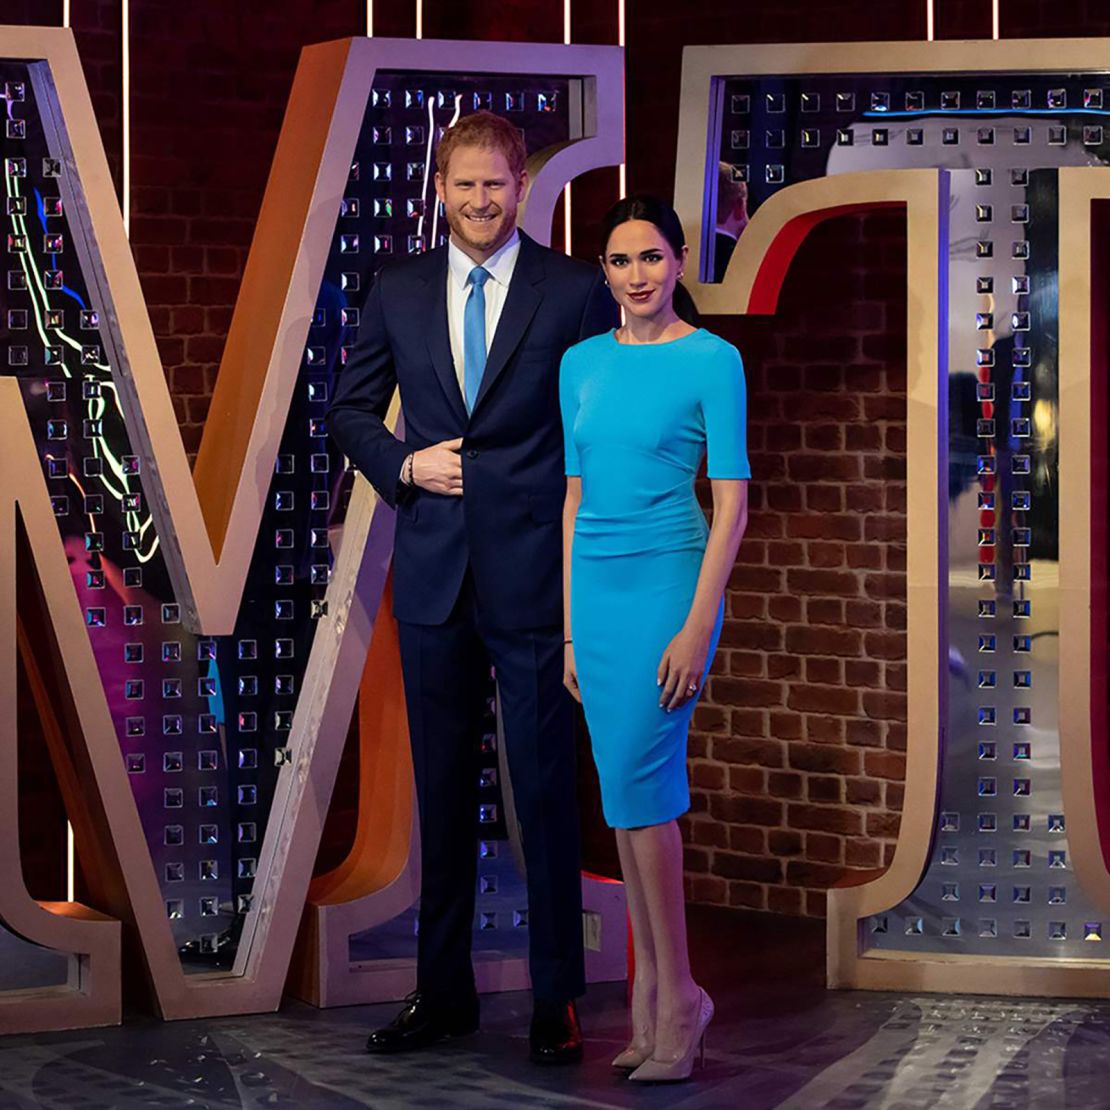 Waxworks of Harry and Meghan